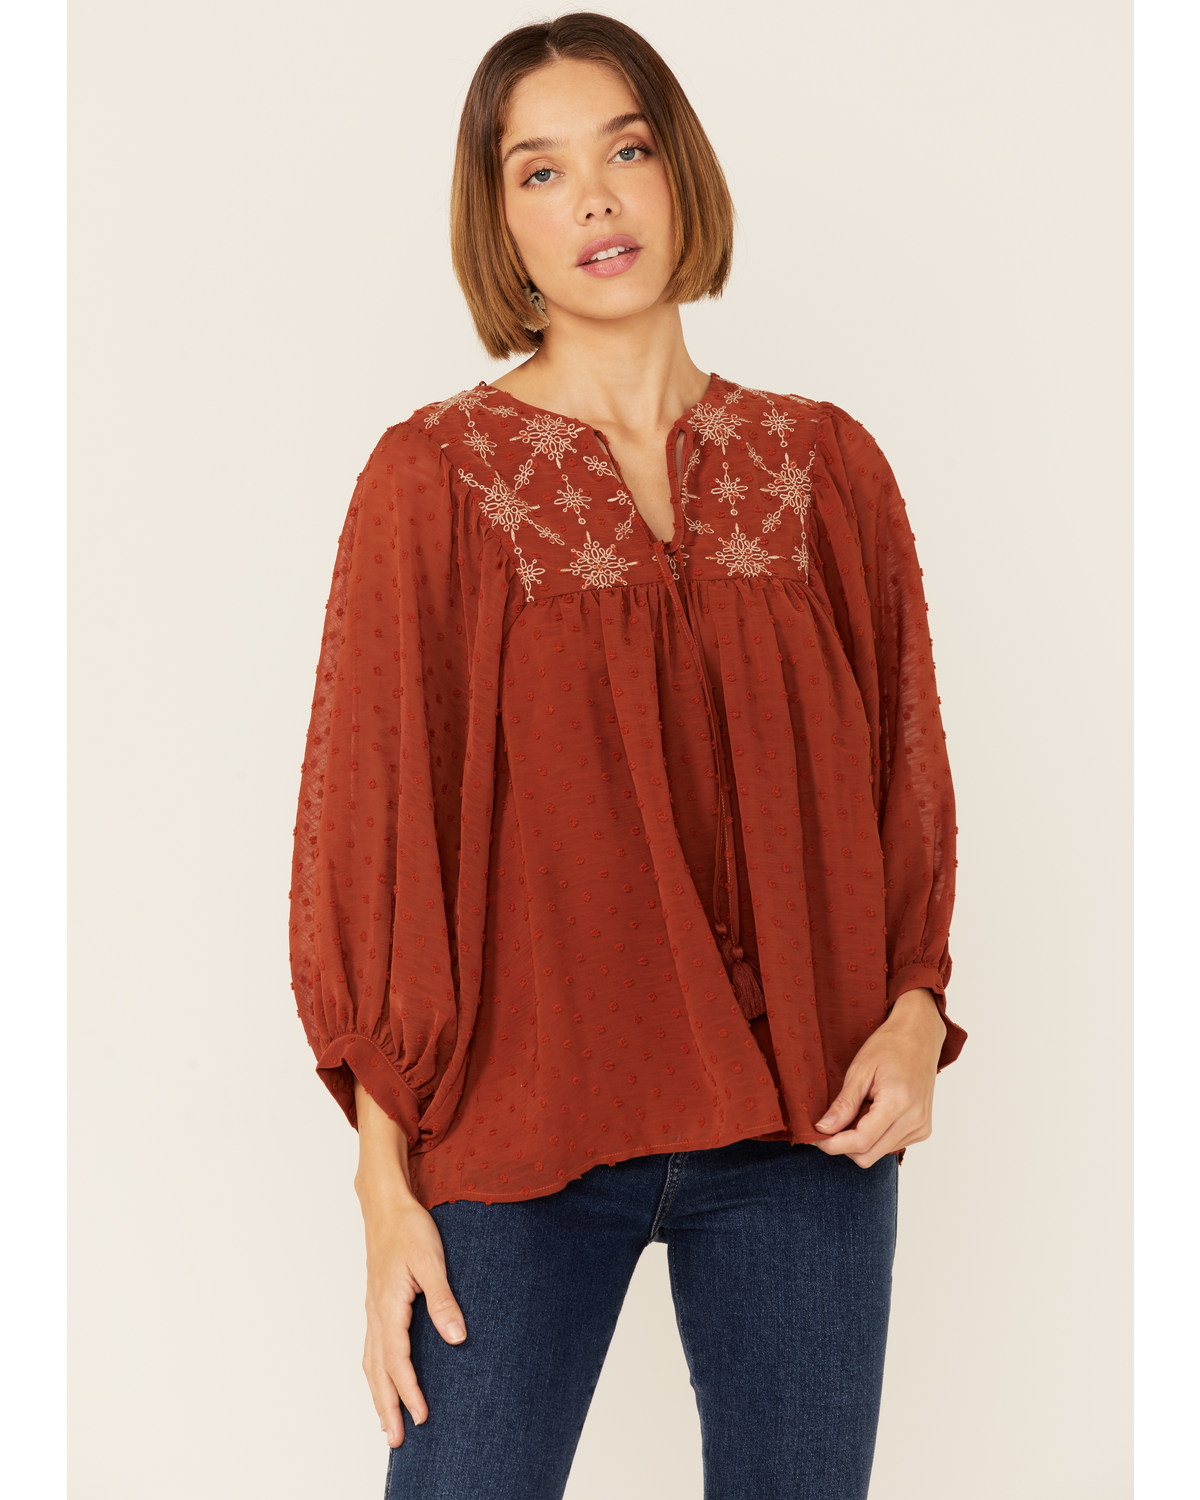 Flying Tomato Women's Embroidered Long Sleeve Peasant Top